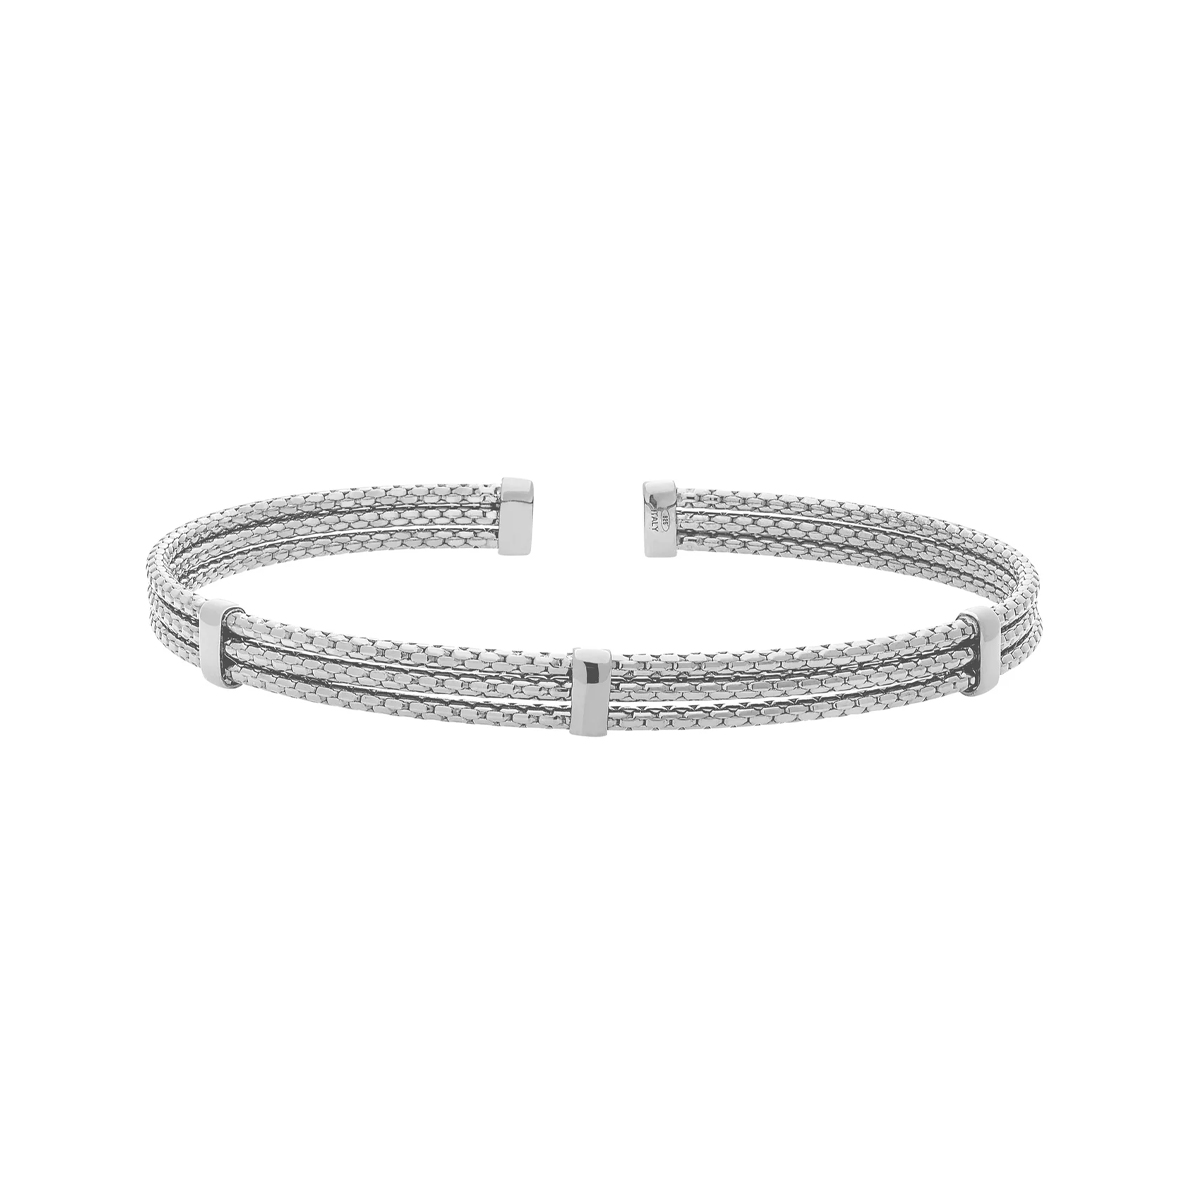 Sterling Silver 3-Cable 3-Bar Cuff Bracelet